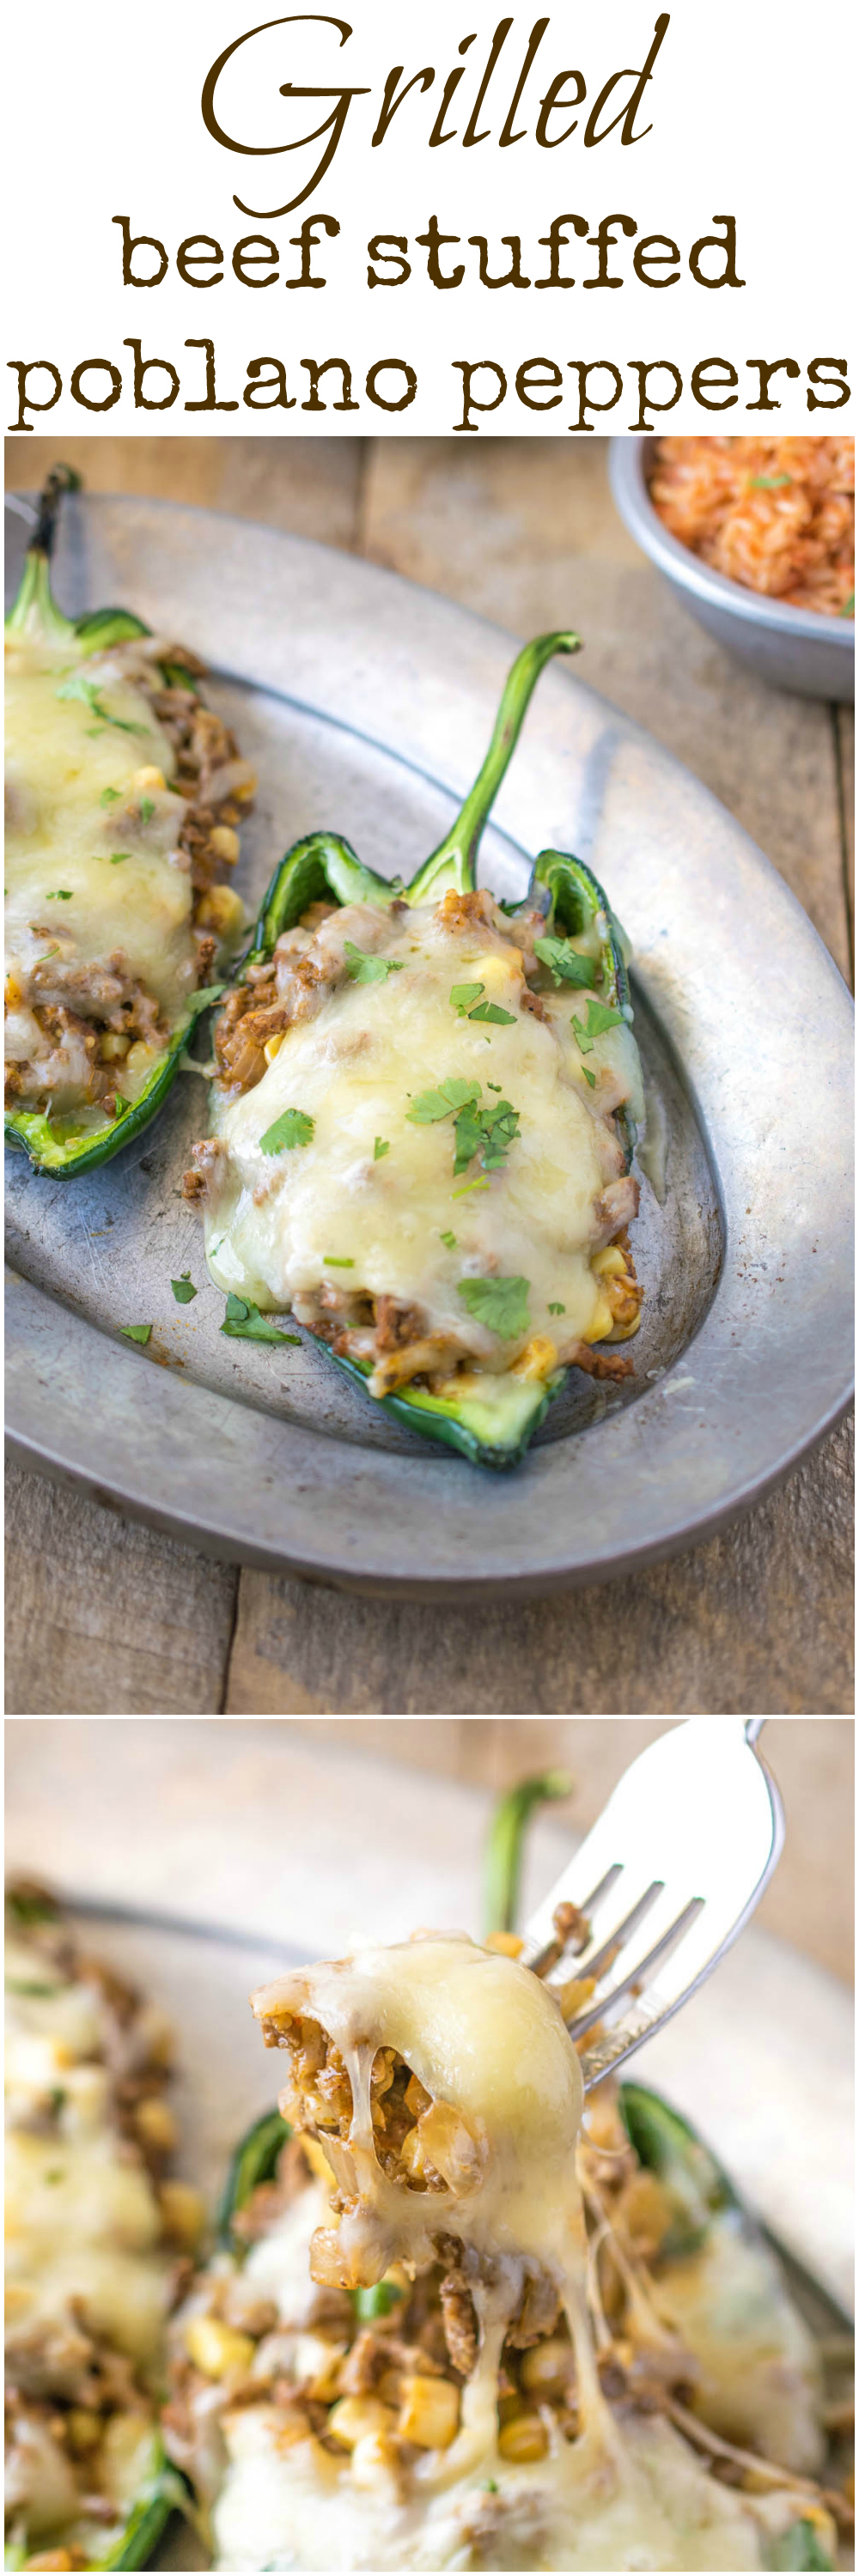 Grilled beef stuffed poblano peppers. Ground beef cooked with chili powder, corn and salsa verde stuffed into poblano peppers and topped with melted cheese.